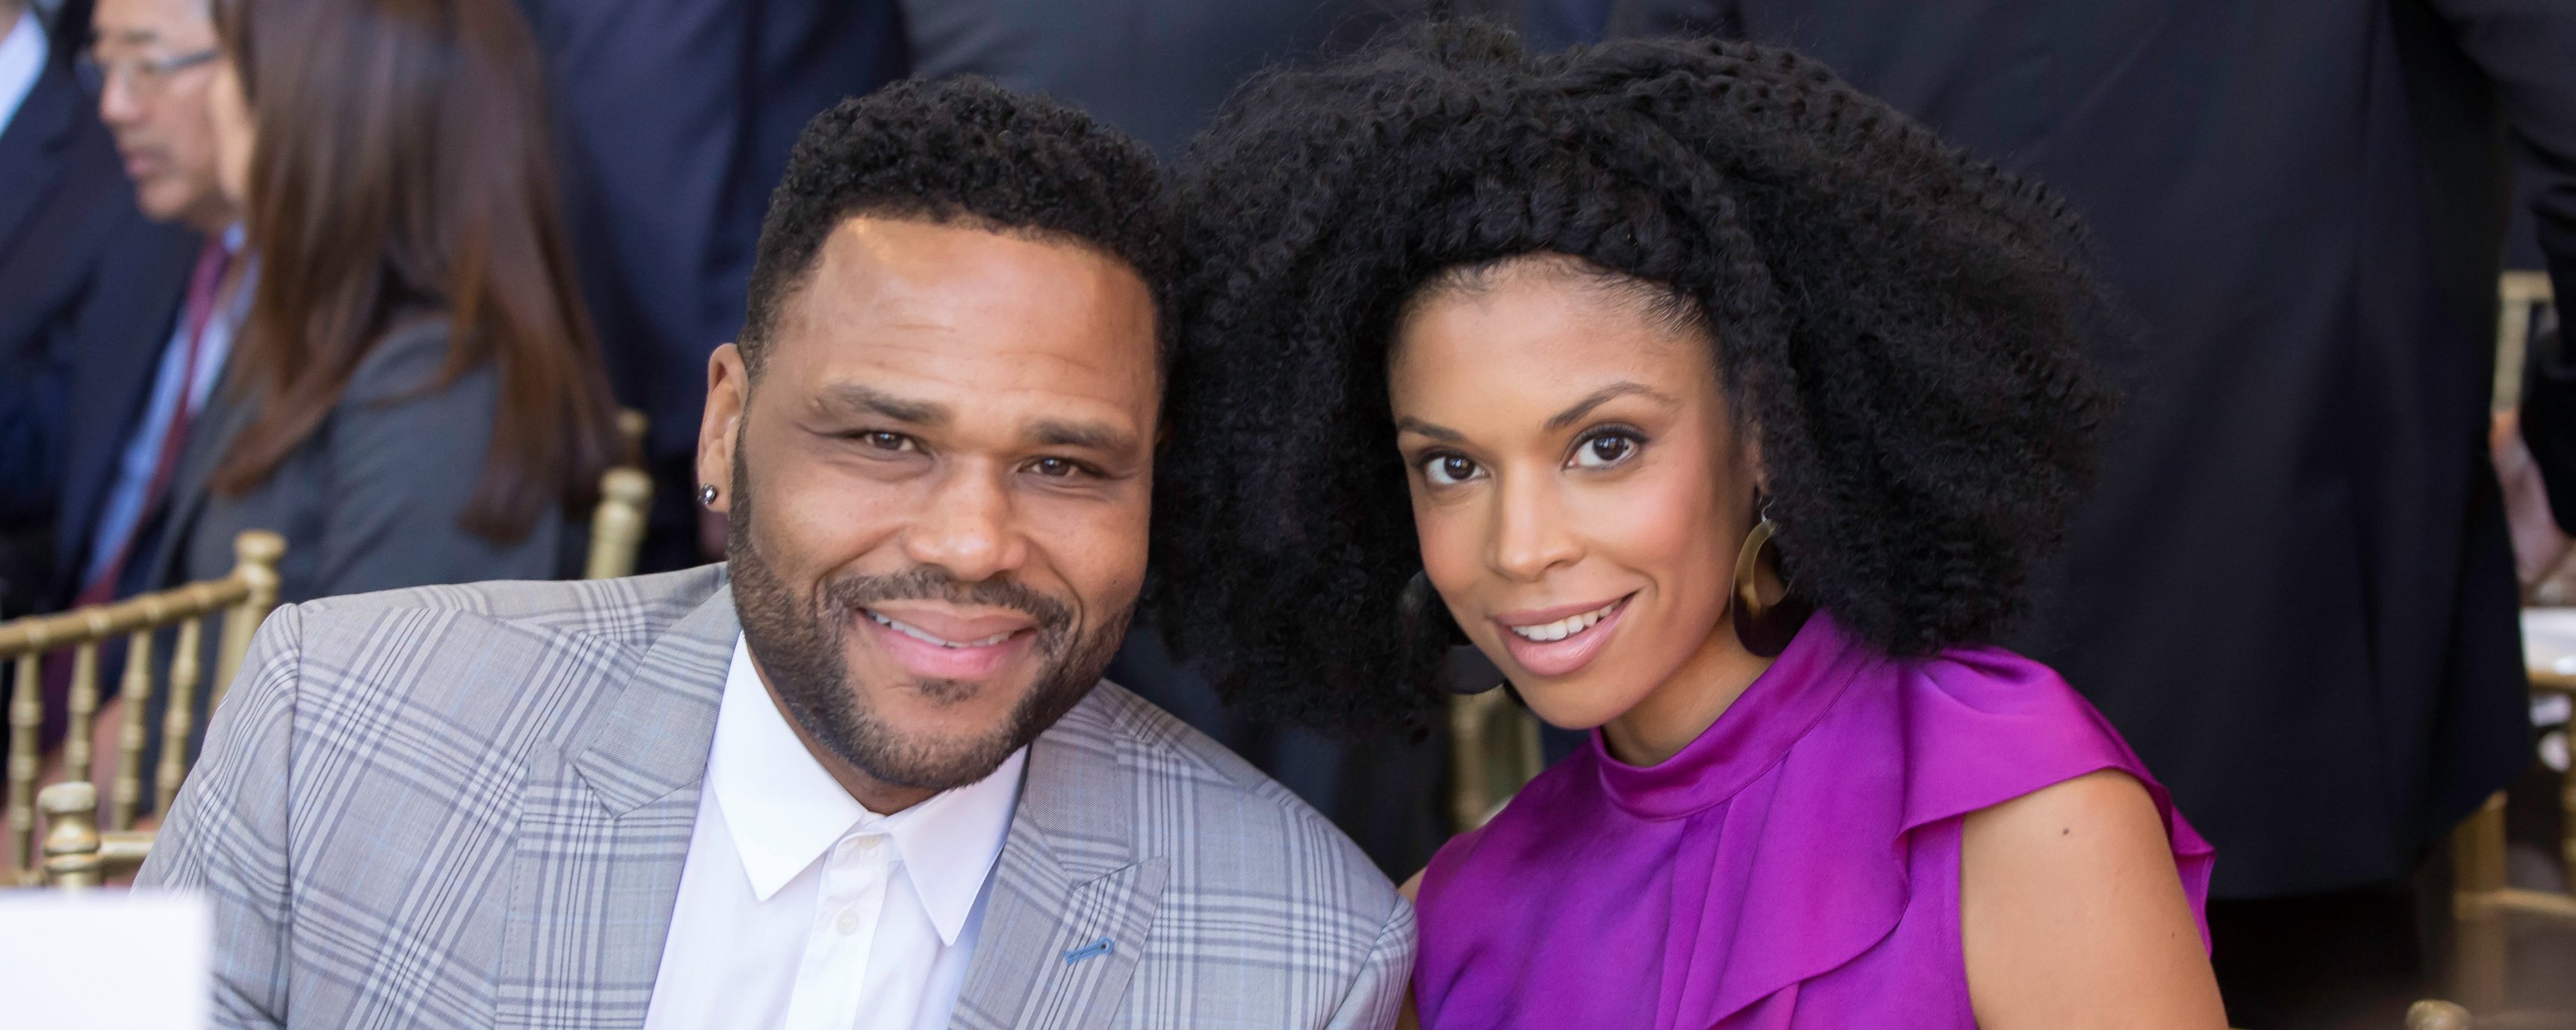 Anthony Anderson, a middle-aged Black man, seated next to Susan Kelechi Watson, a middle-aged Black woman